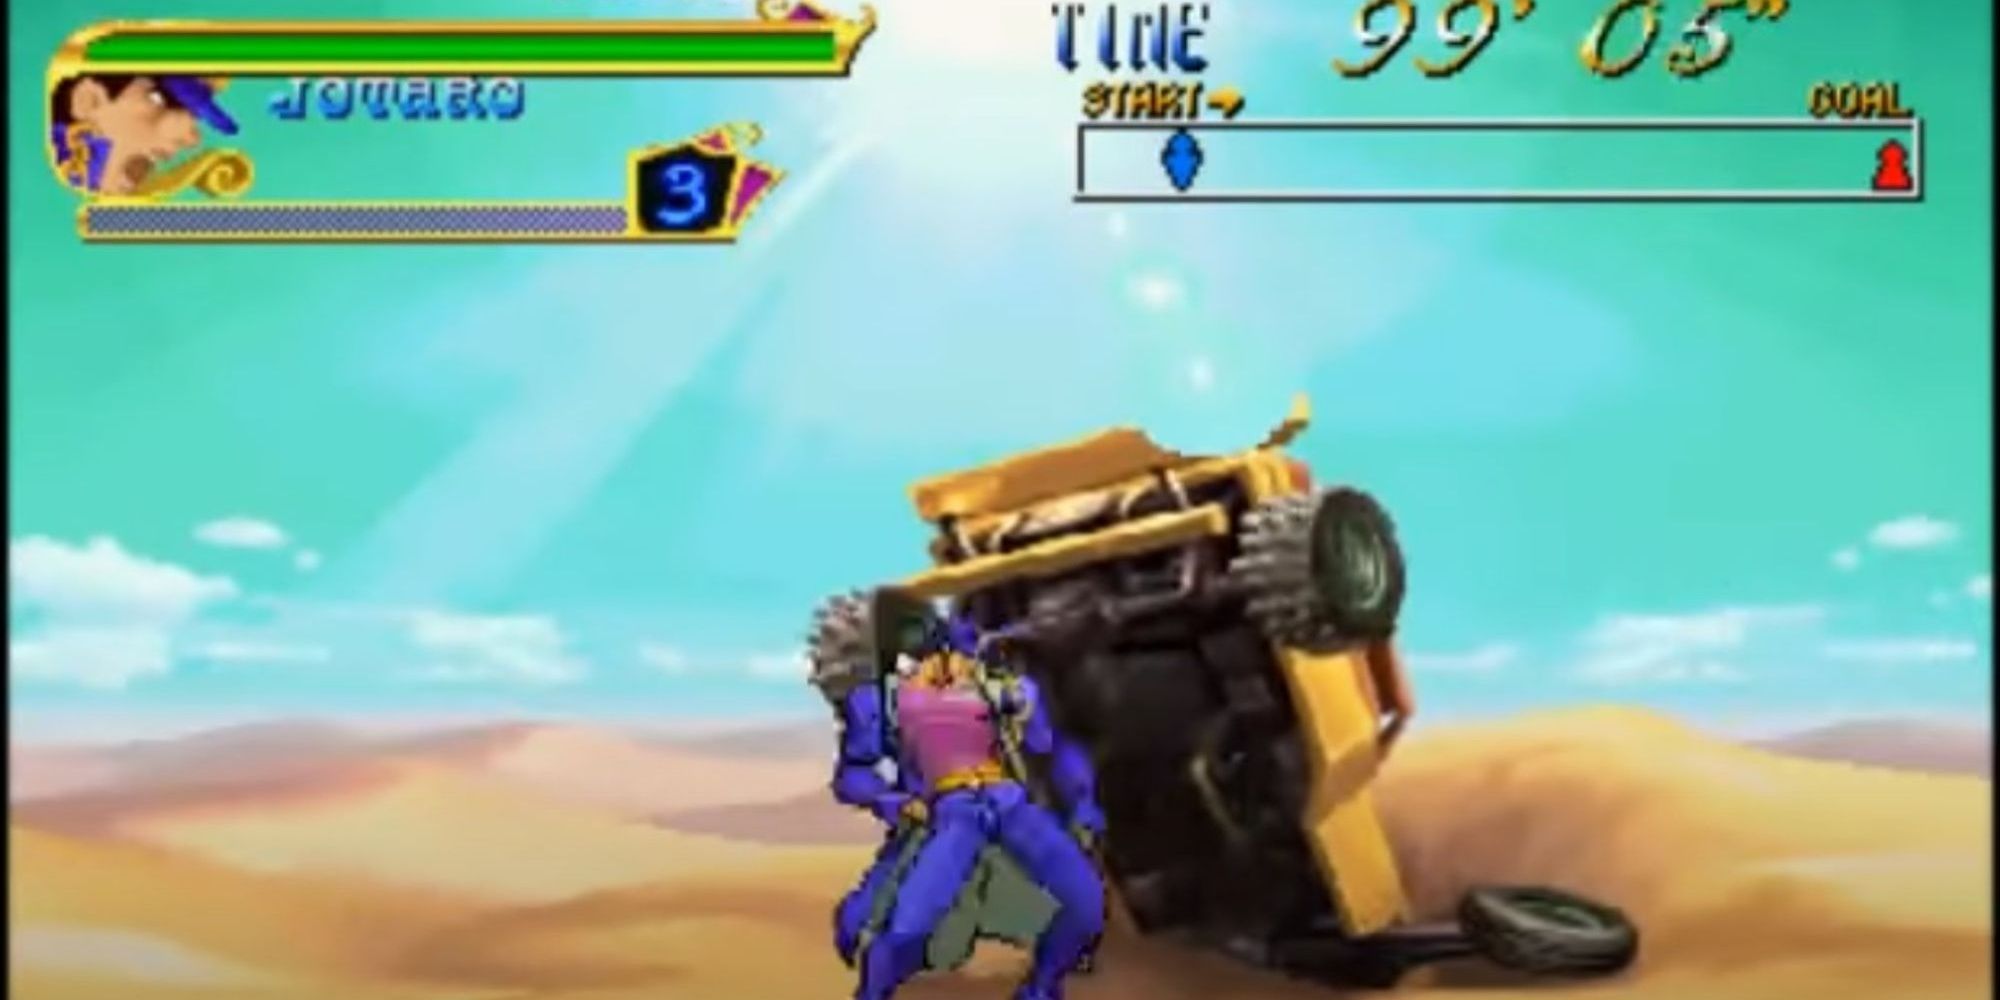 Gameplay Of JoJo's Venture For Arcade with character next to vehicle in sand